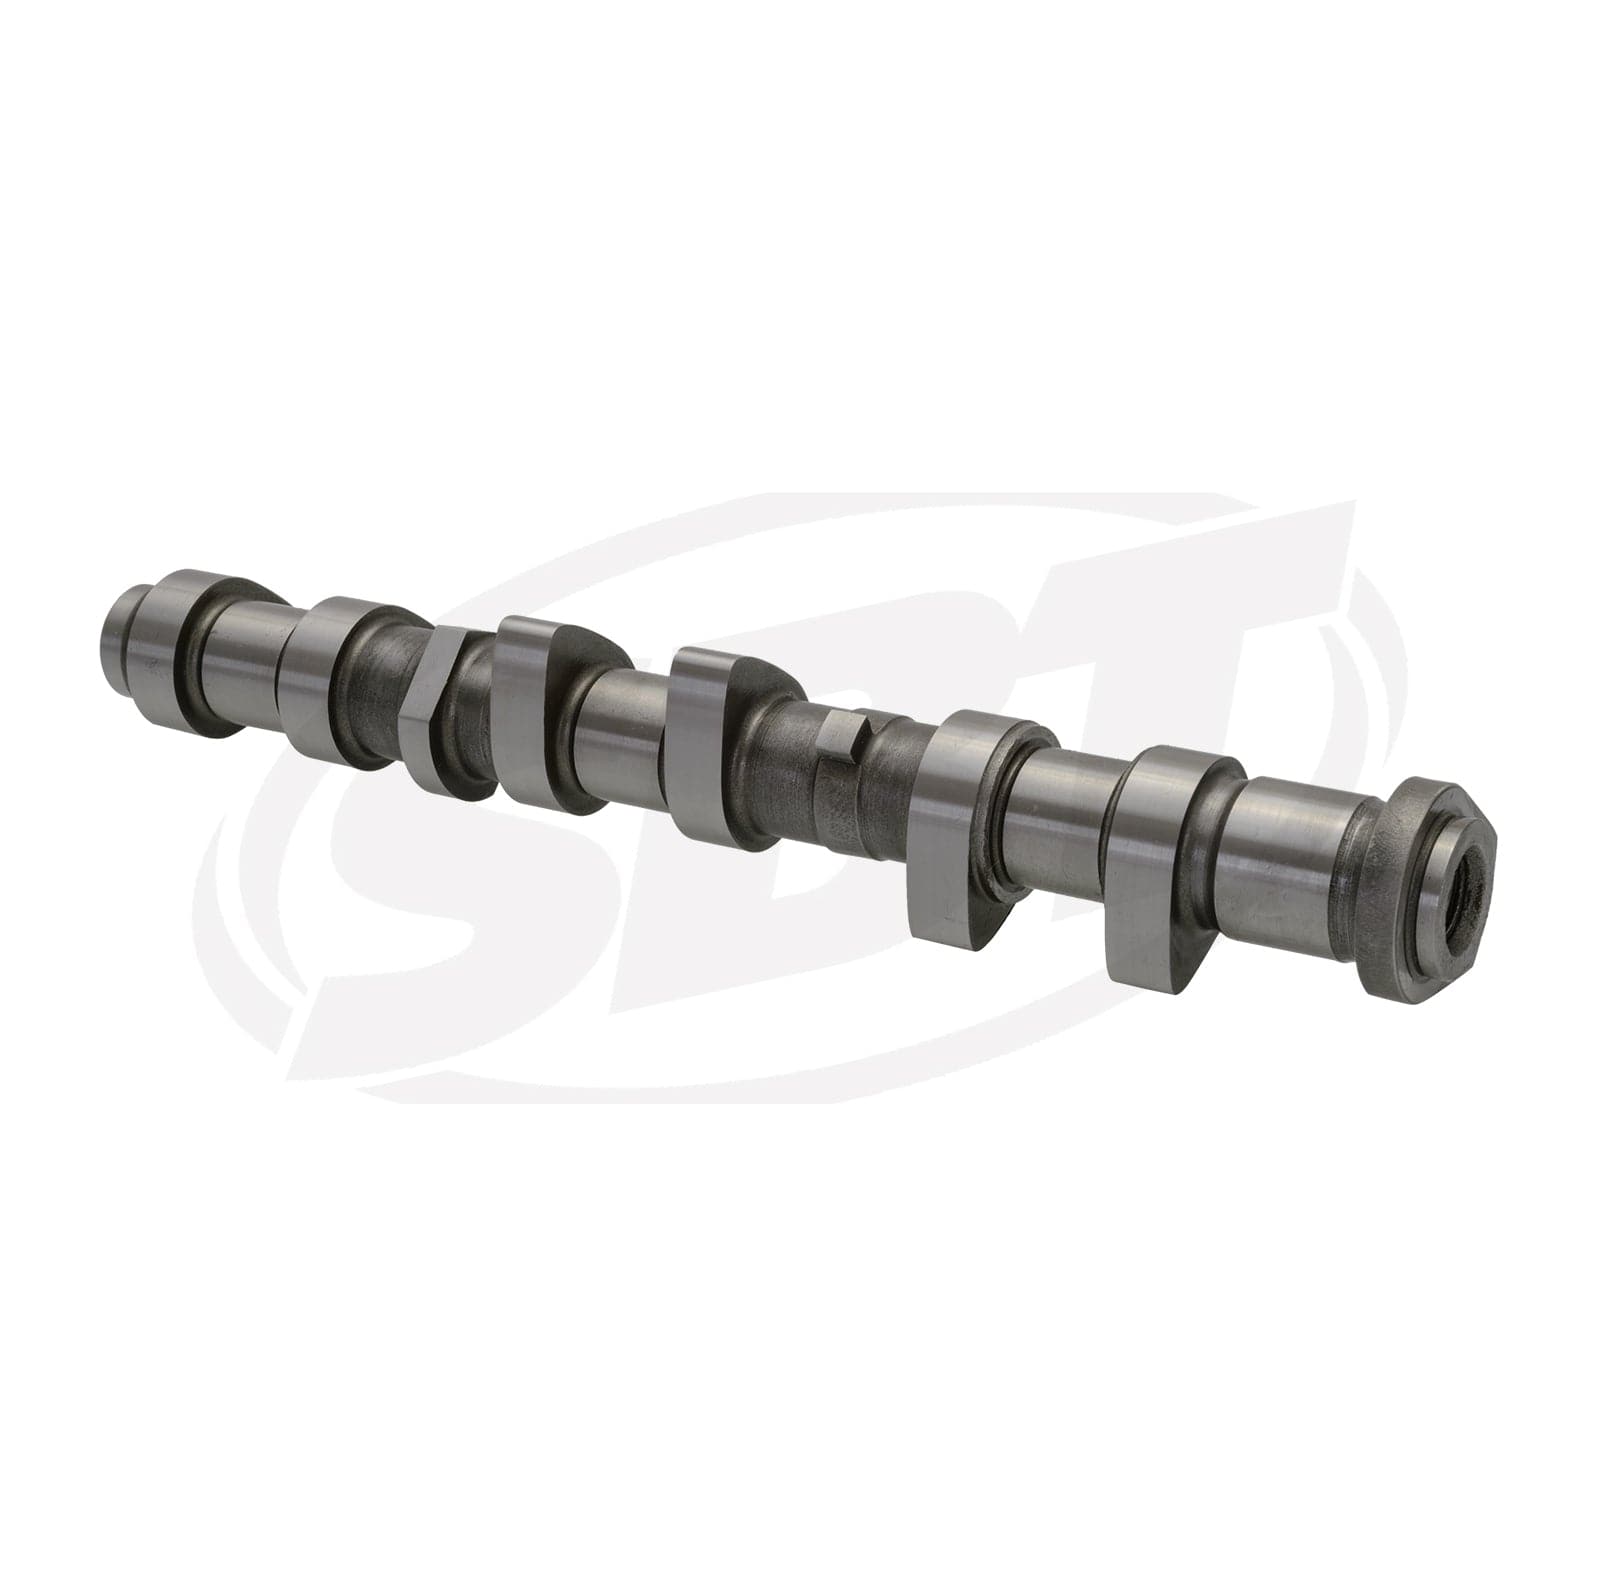 Exhaust Camshaft for Sea-Doo Spark - 420820210 2014-2017